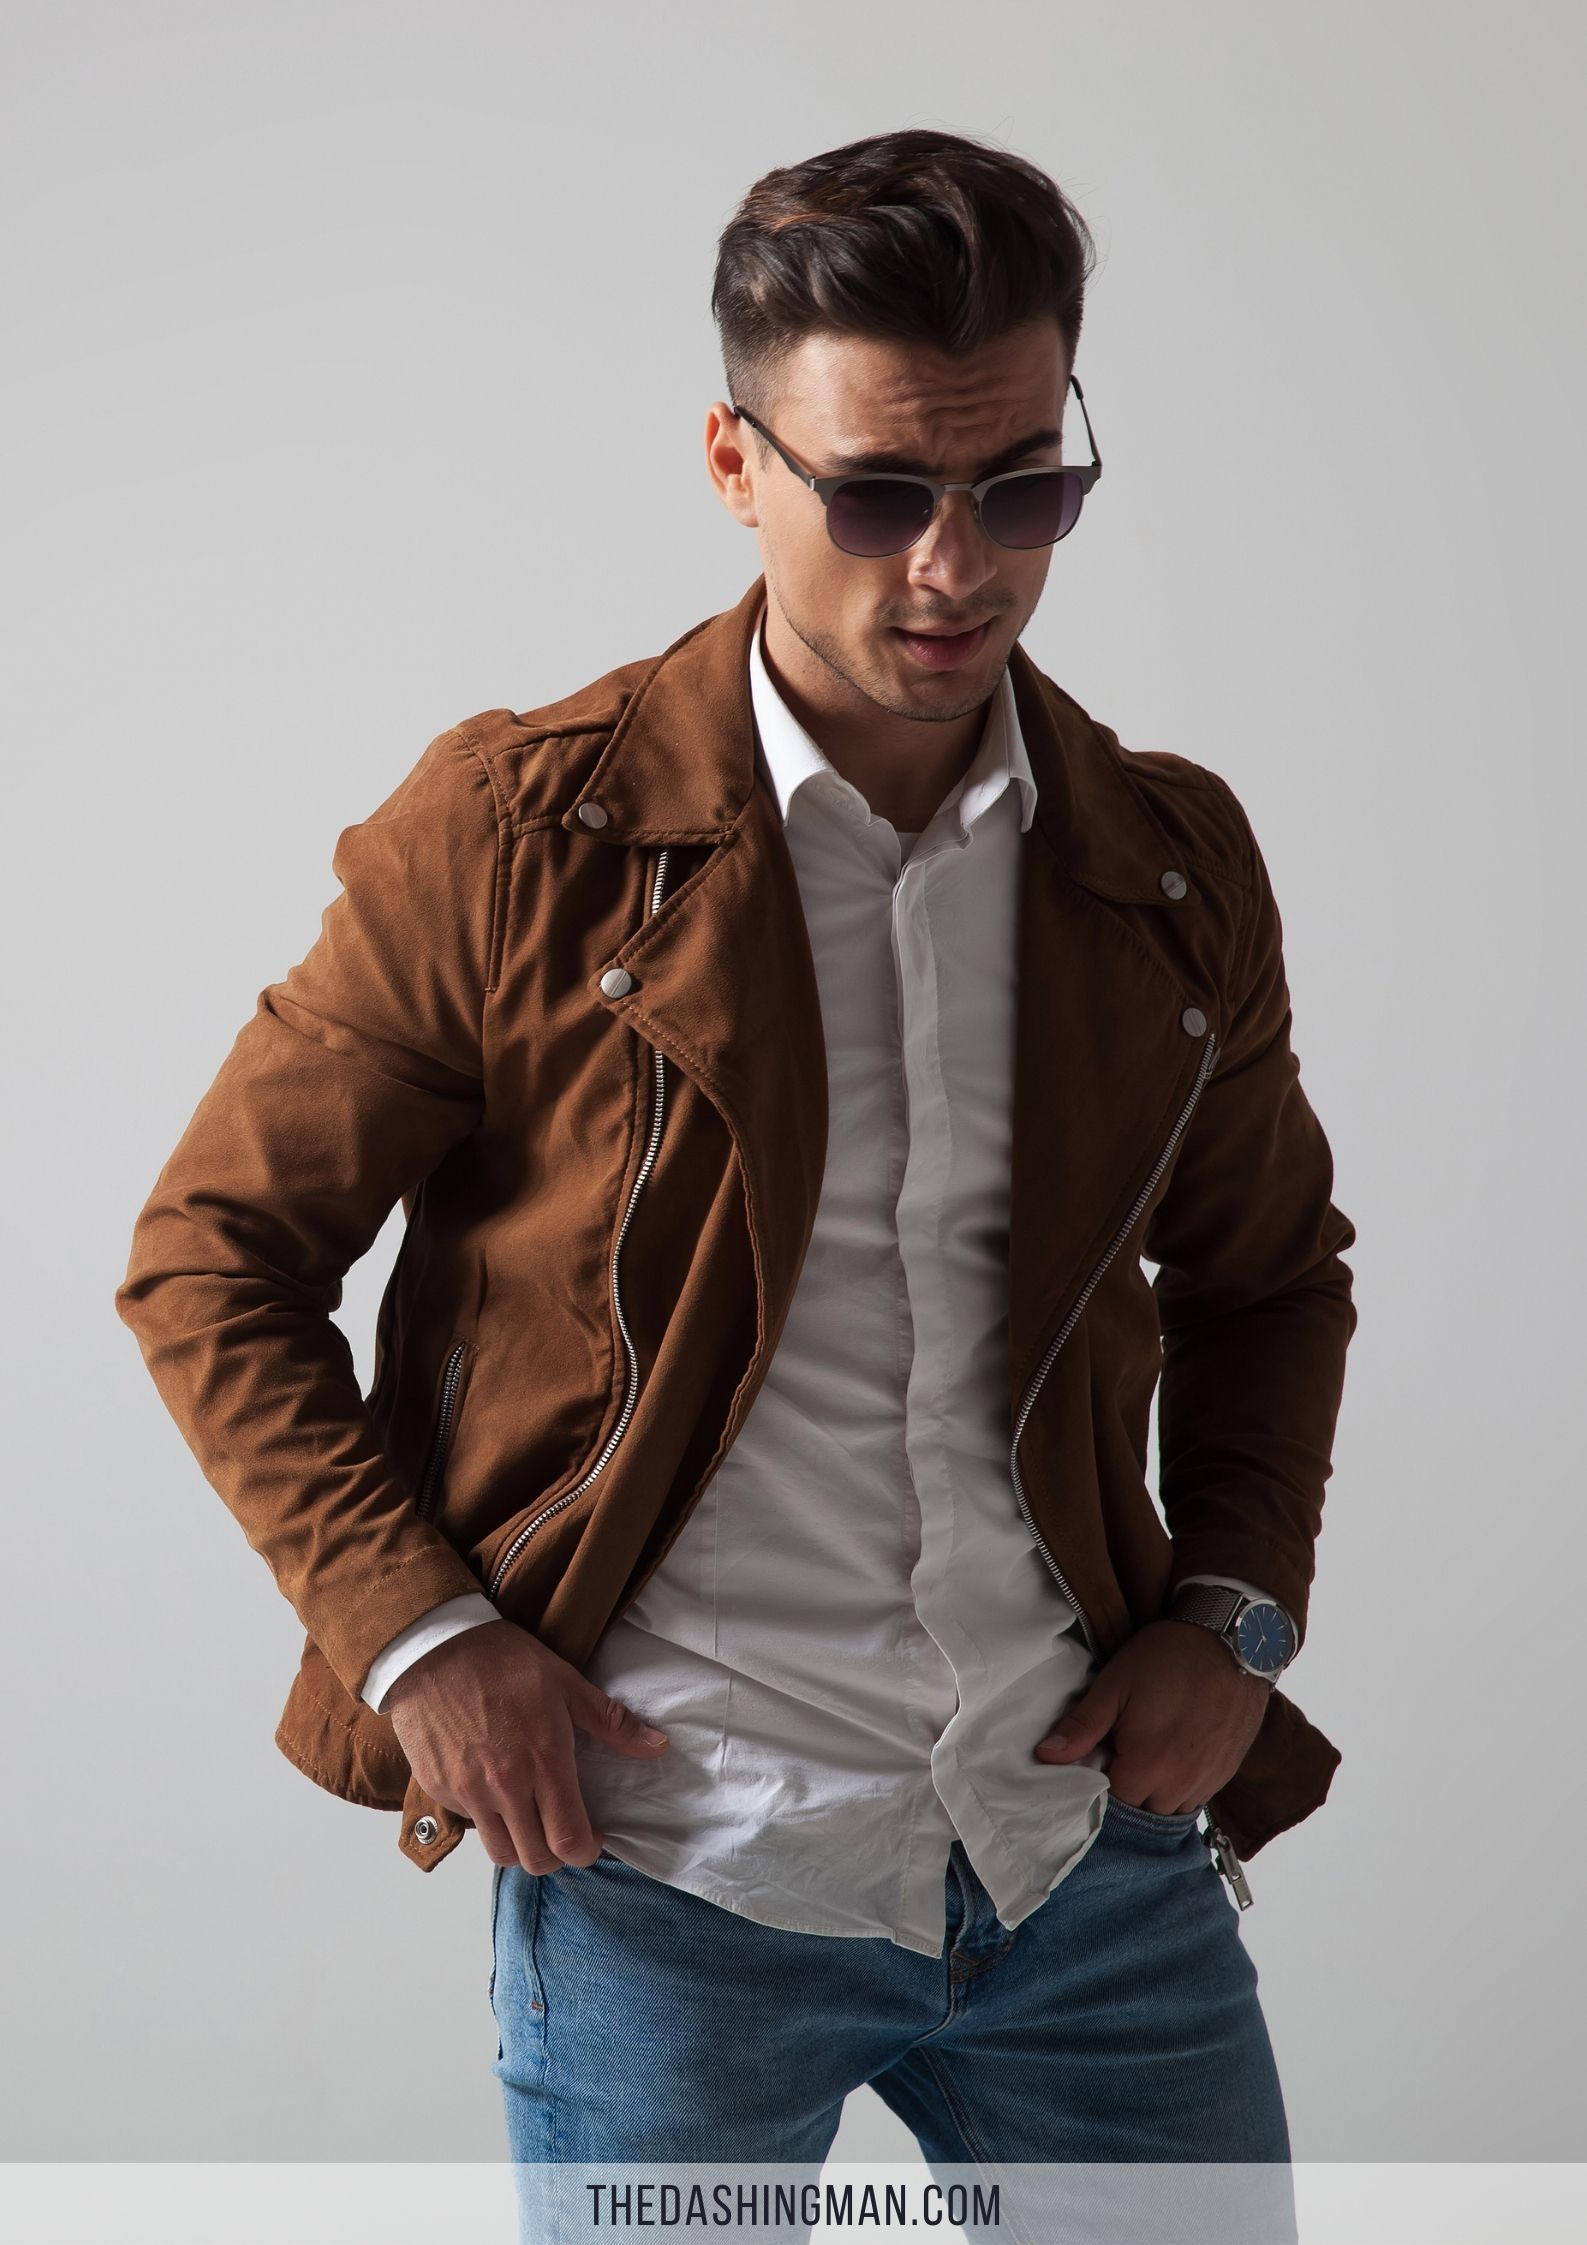 25+ Simple and Stylish Photoshoot Poses for Men - The Dashing Man